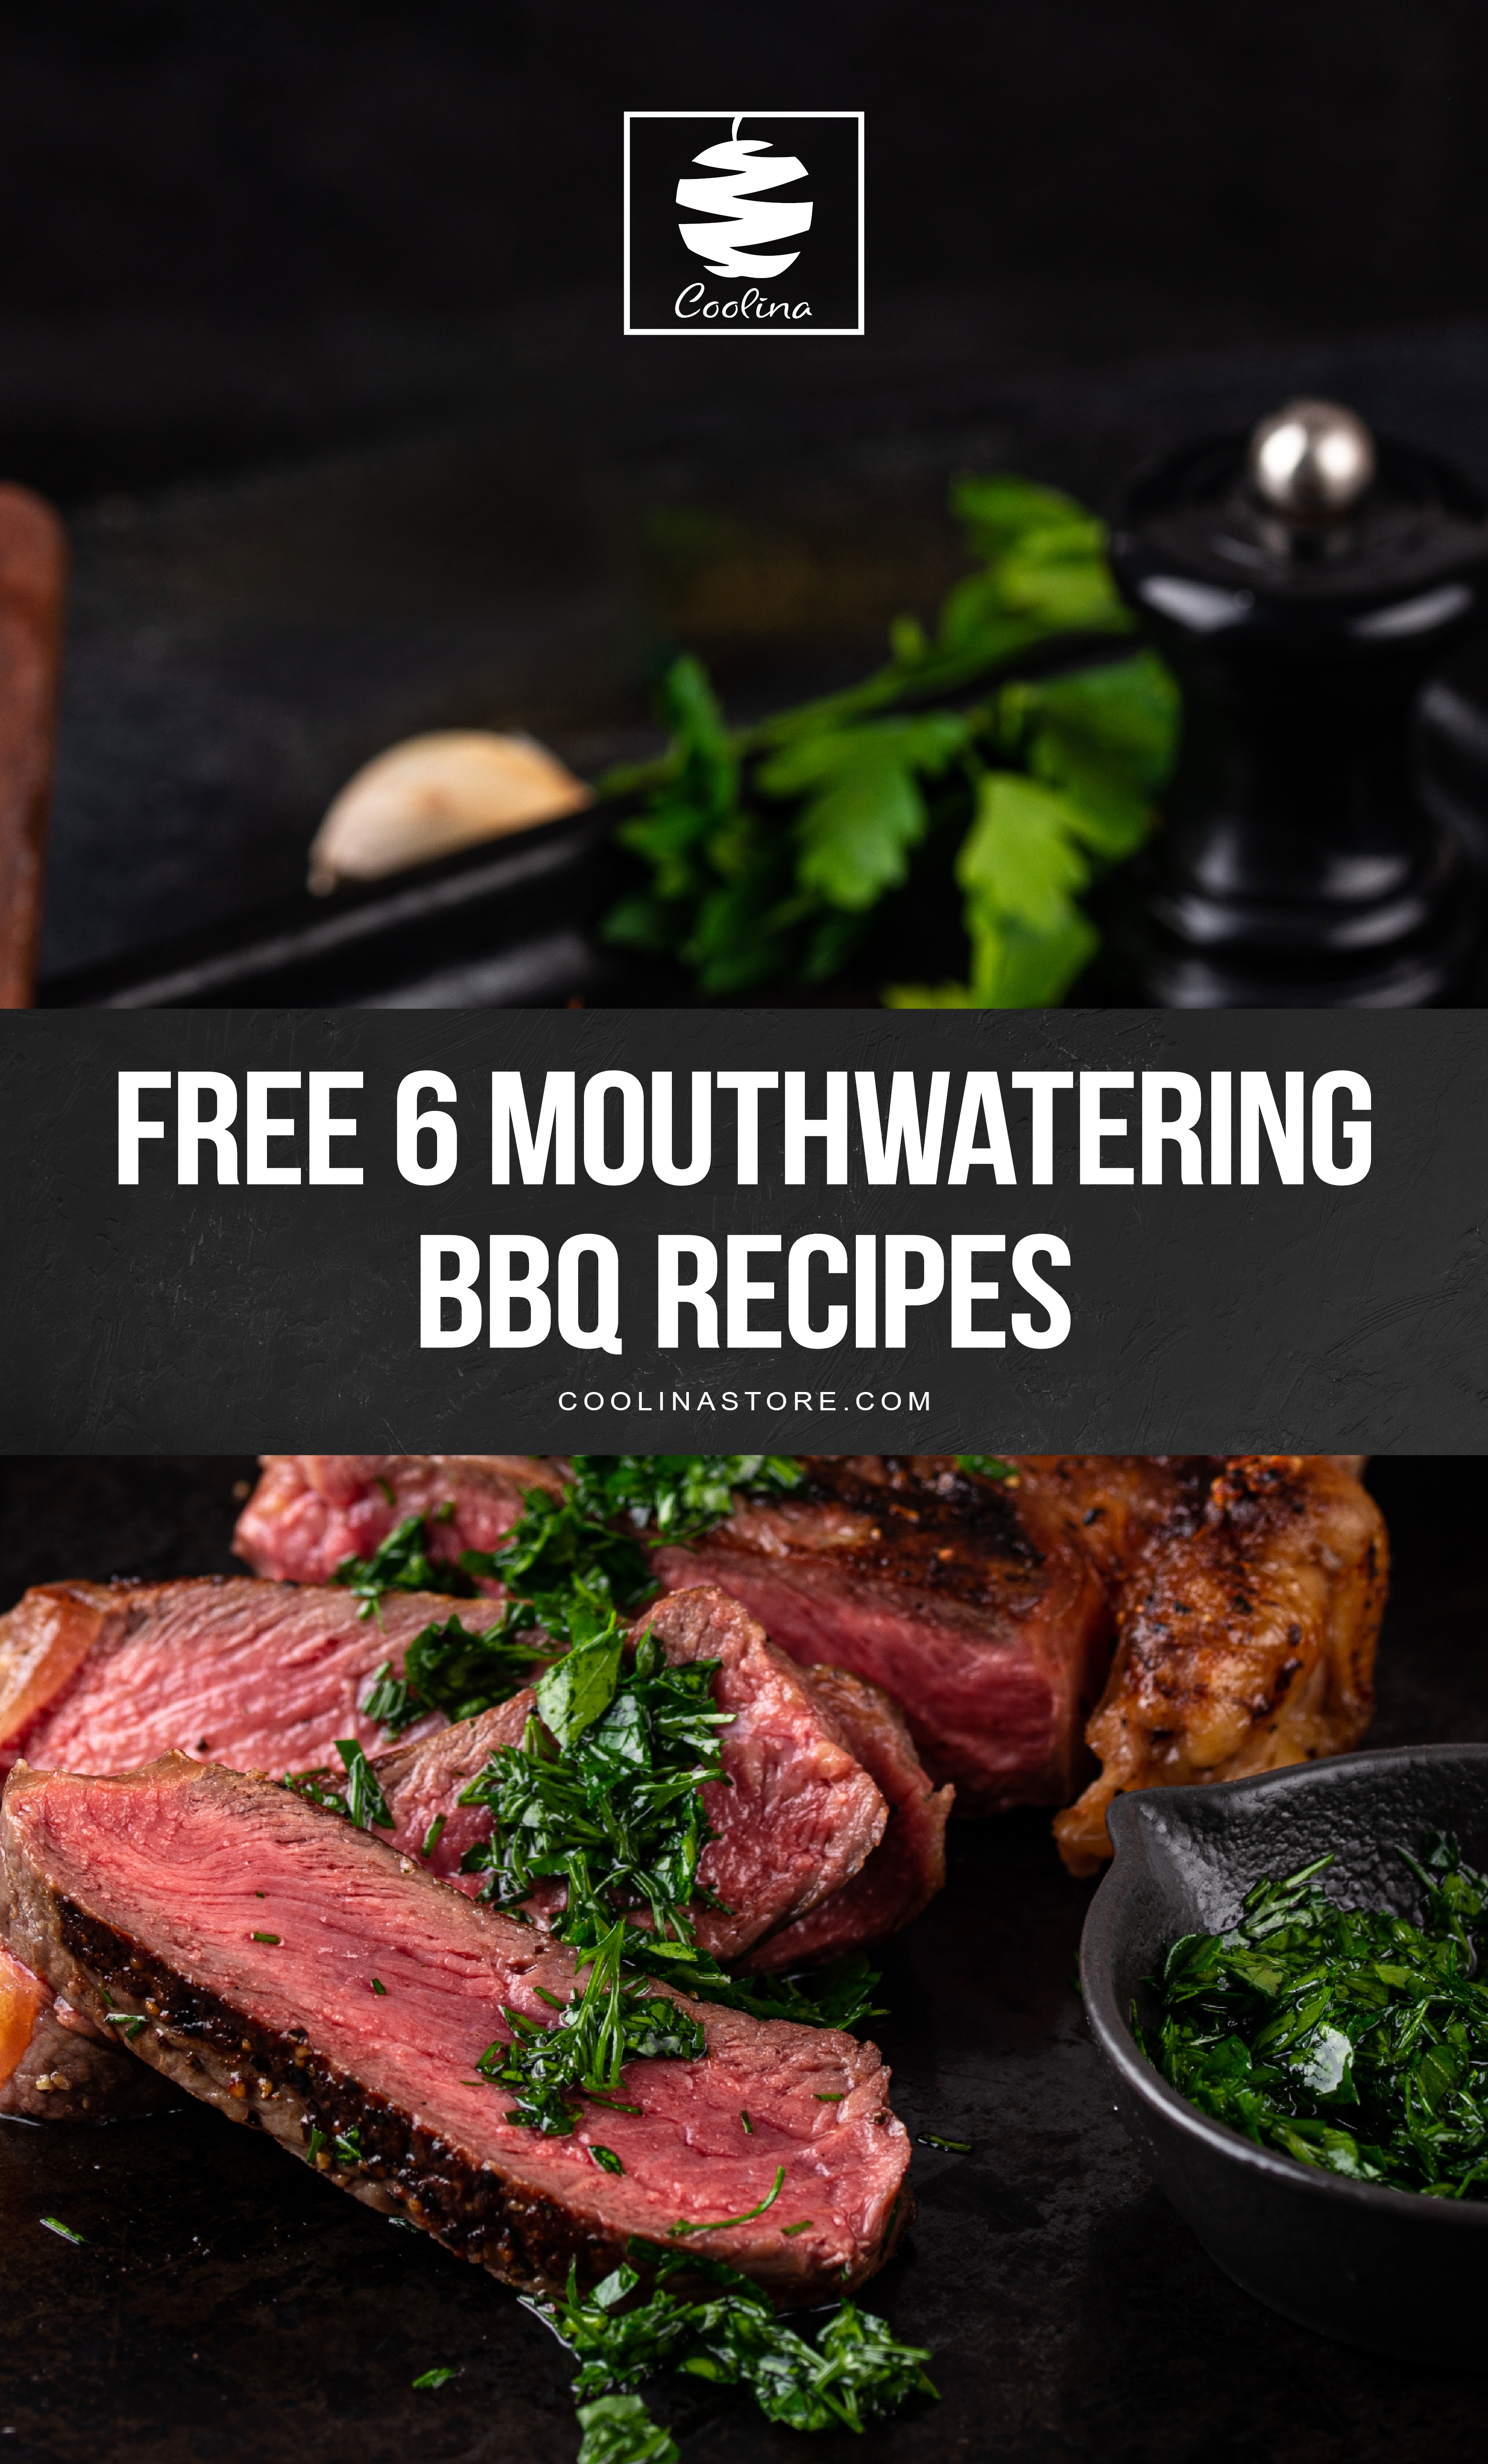 https://cdn.shopify.com/s/files/1/0028/3698/8016/files/FREE_6_Mouthwatering_BBQ_Recipes_02.png?v=1690373996